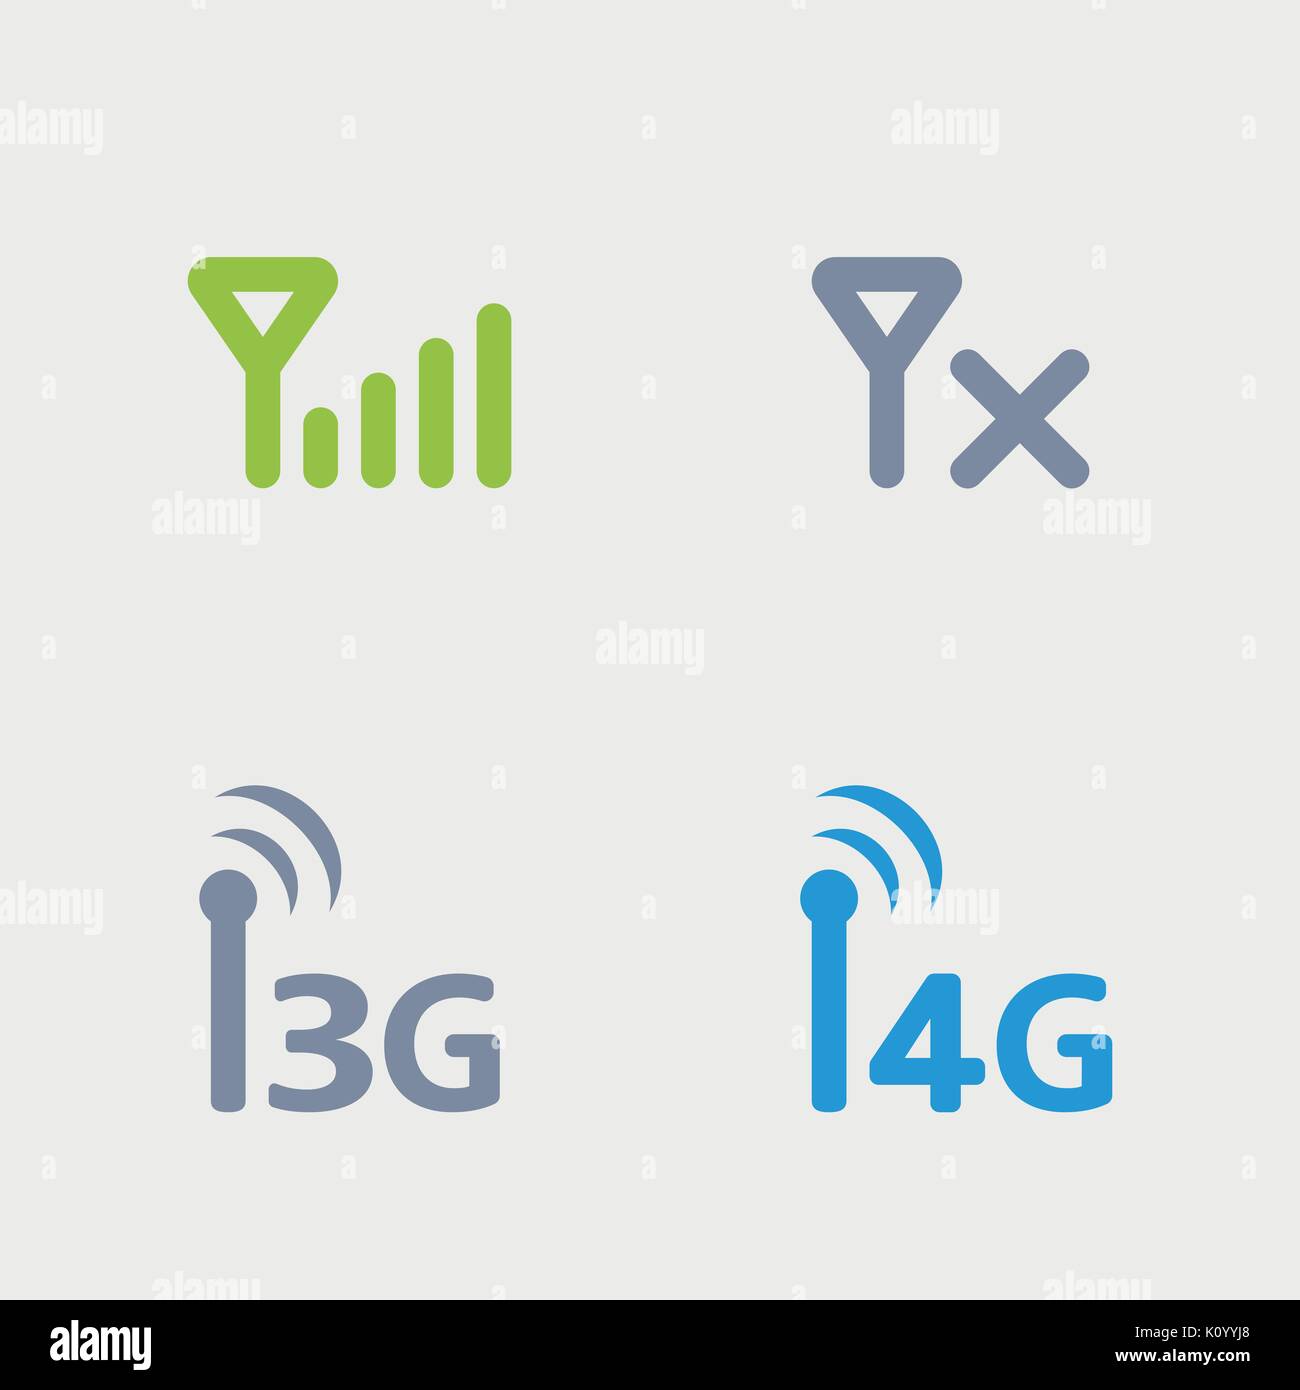 A set of 4 professional, pixel-perfect icons designed on a 32x32 pixel grid. Stock Vector